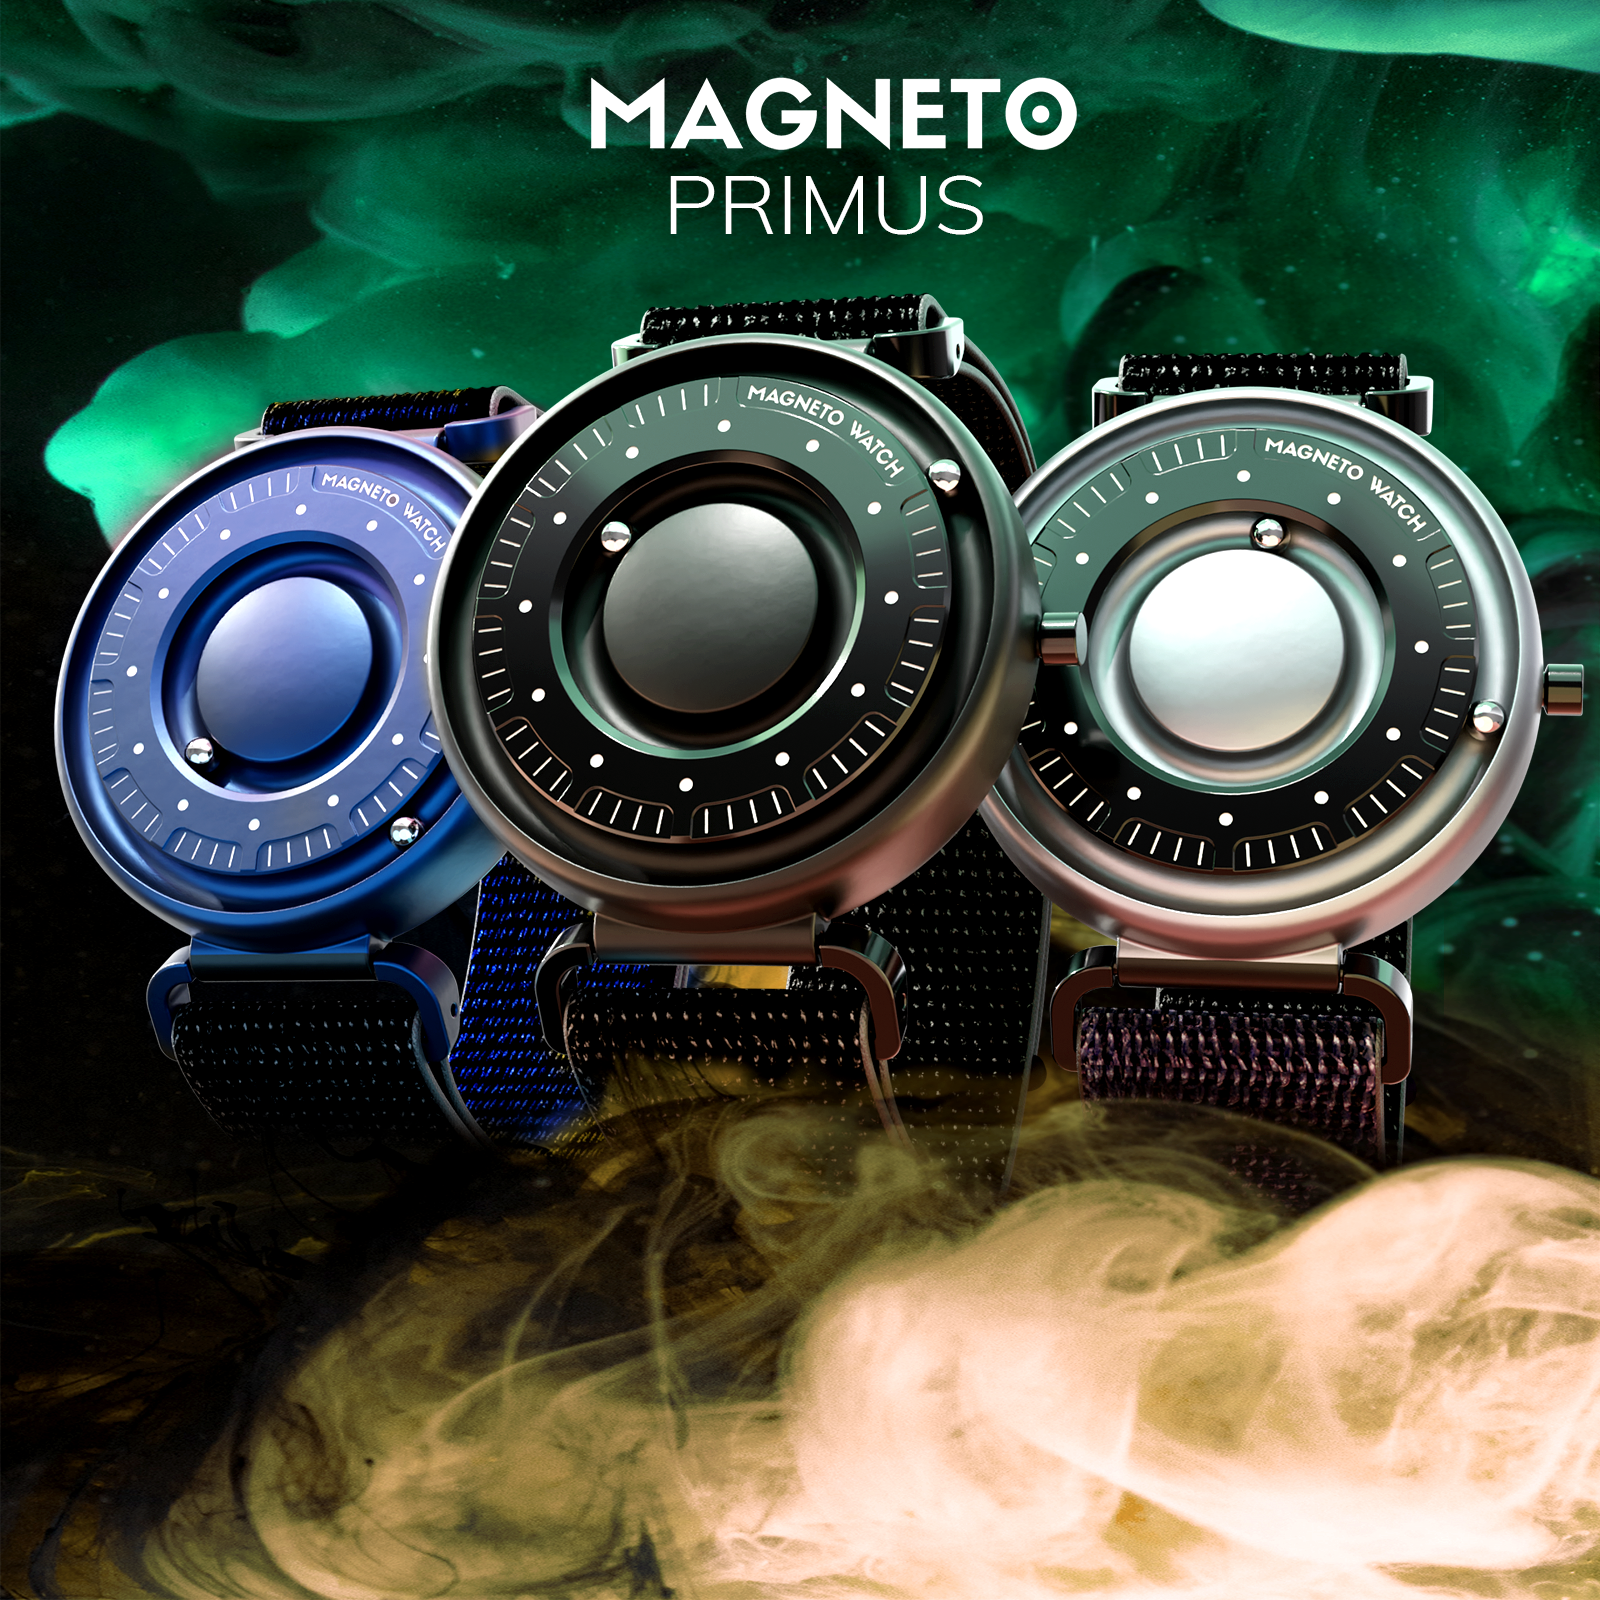 Magneto Watch - Magneto Watch added a new photo.